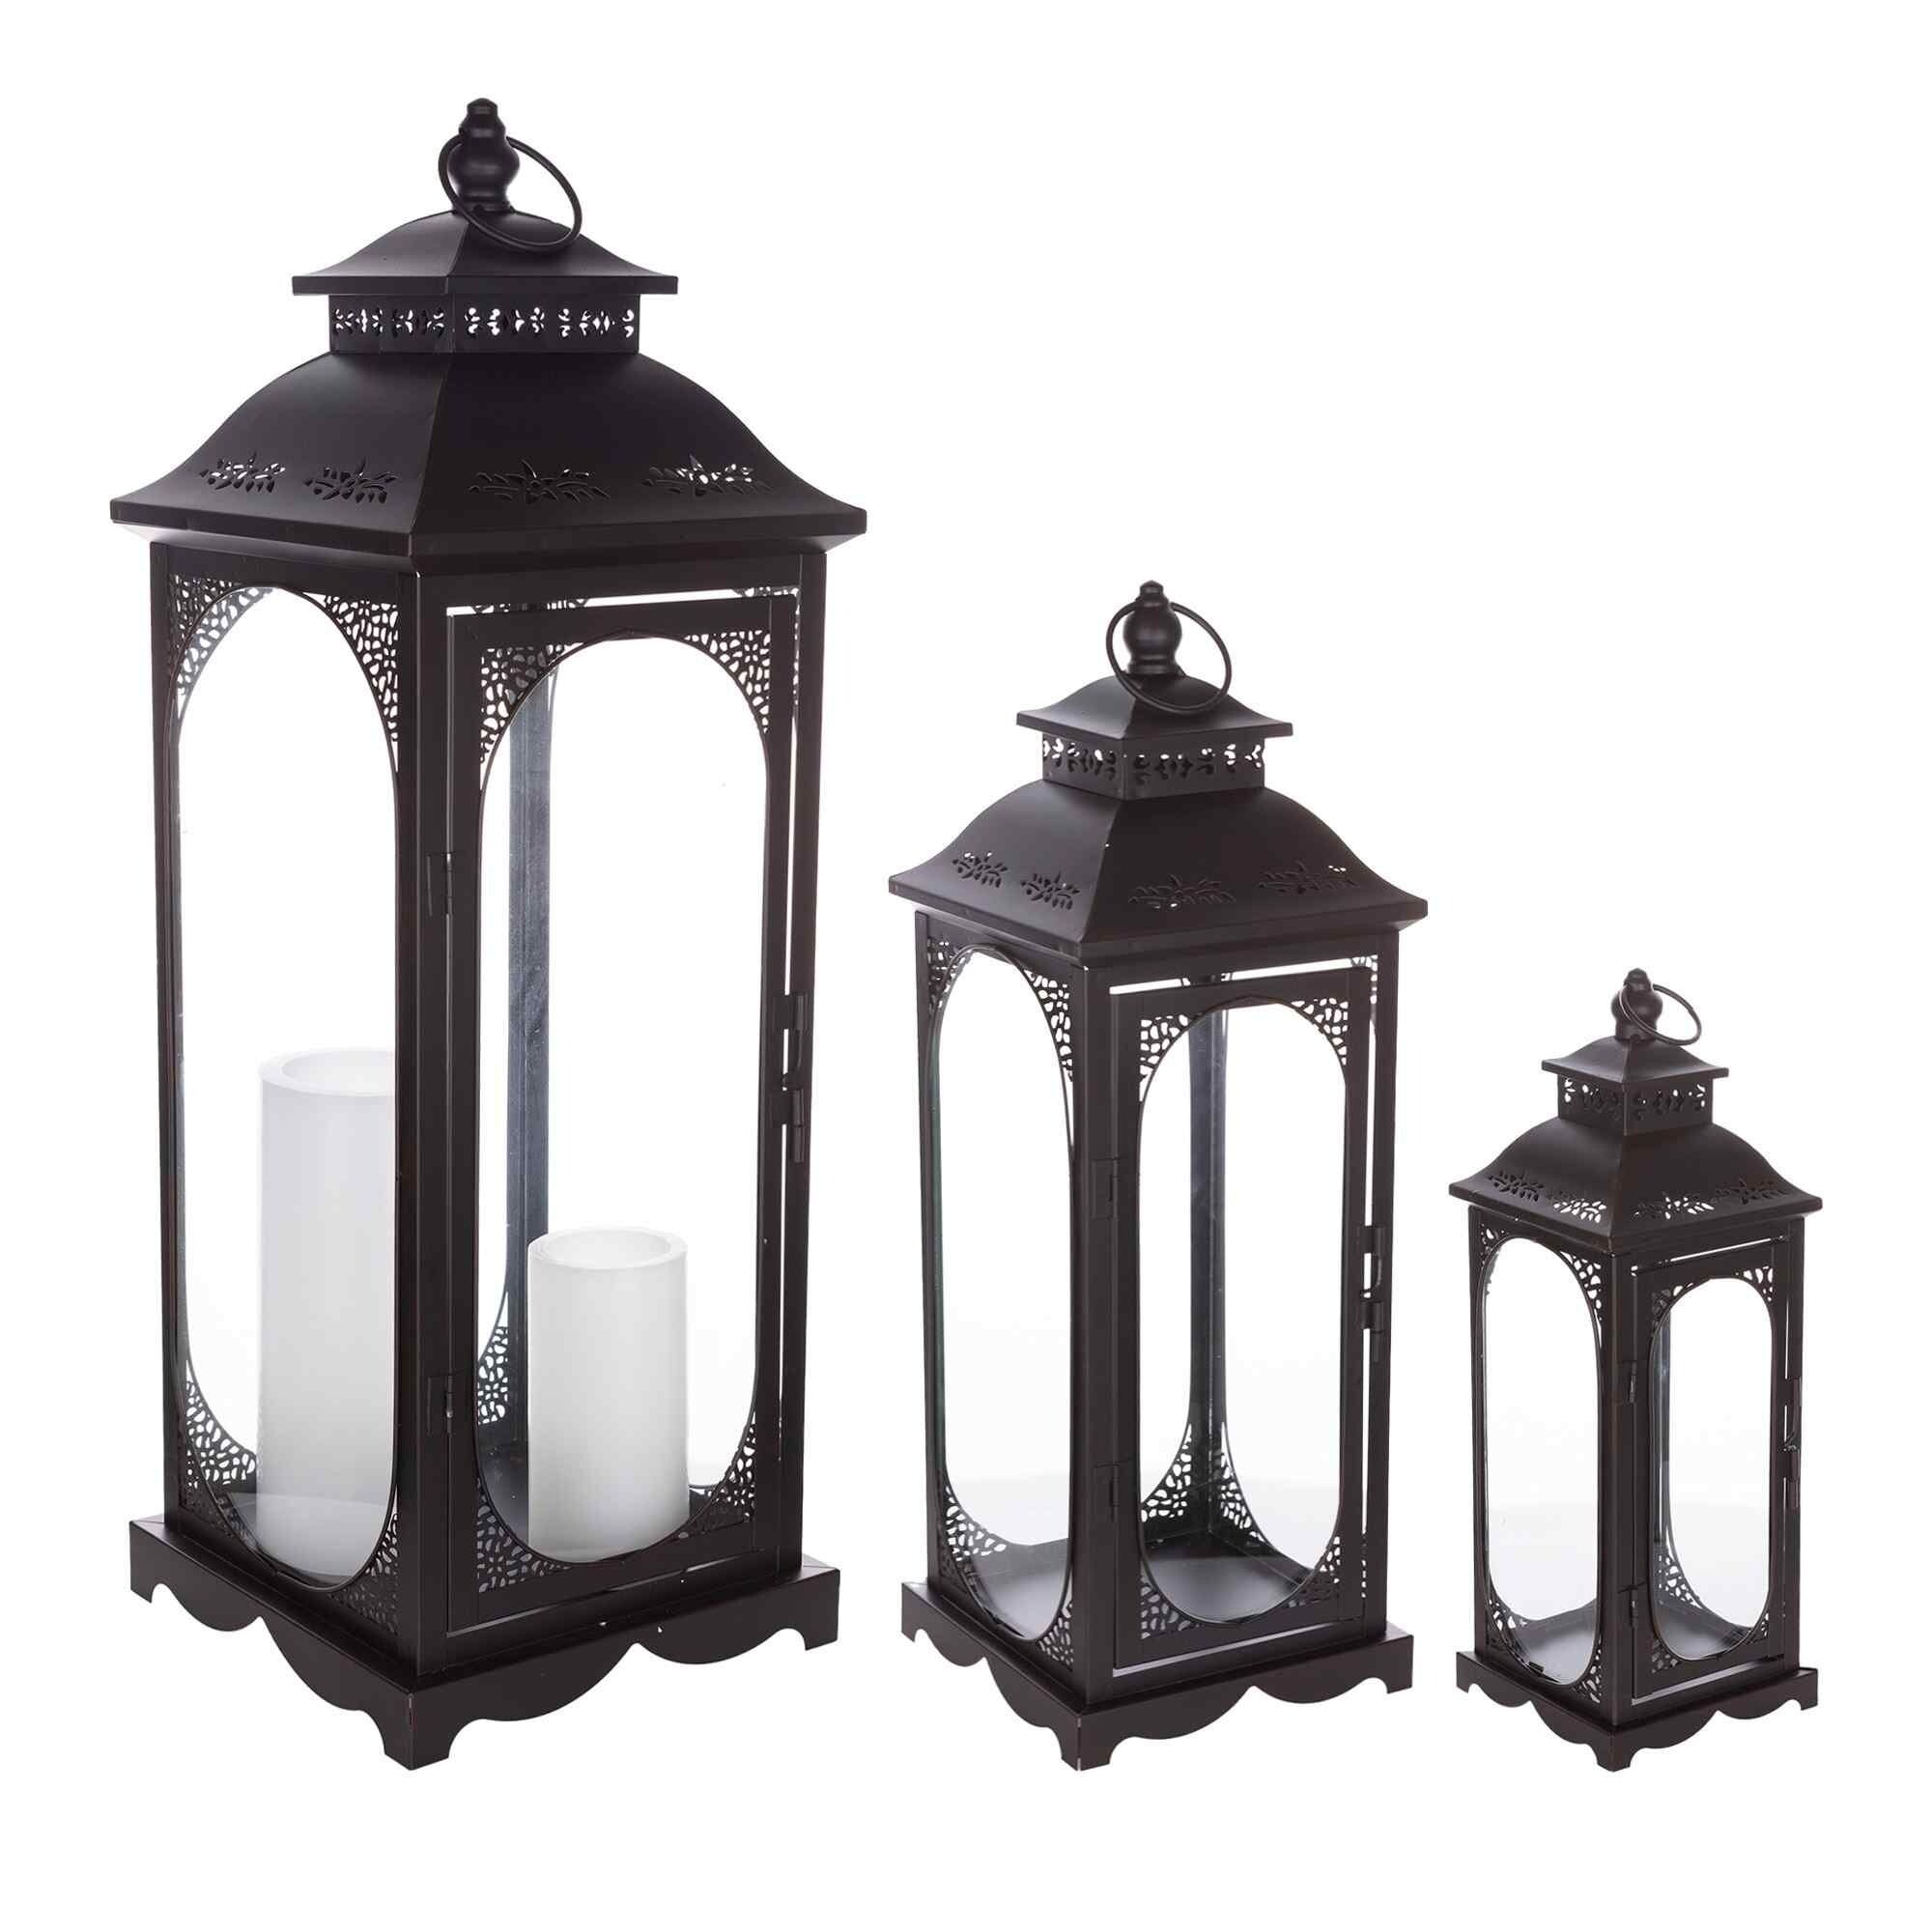 Set of 3 Black Traditional Punched Candle Lanterns 28"